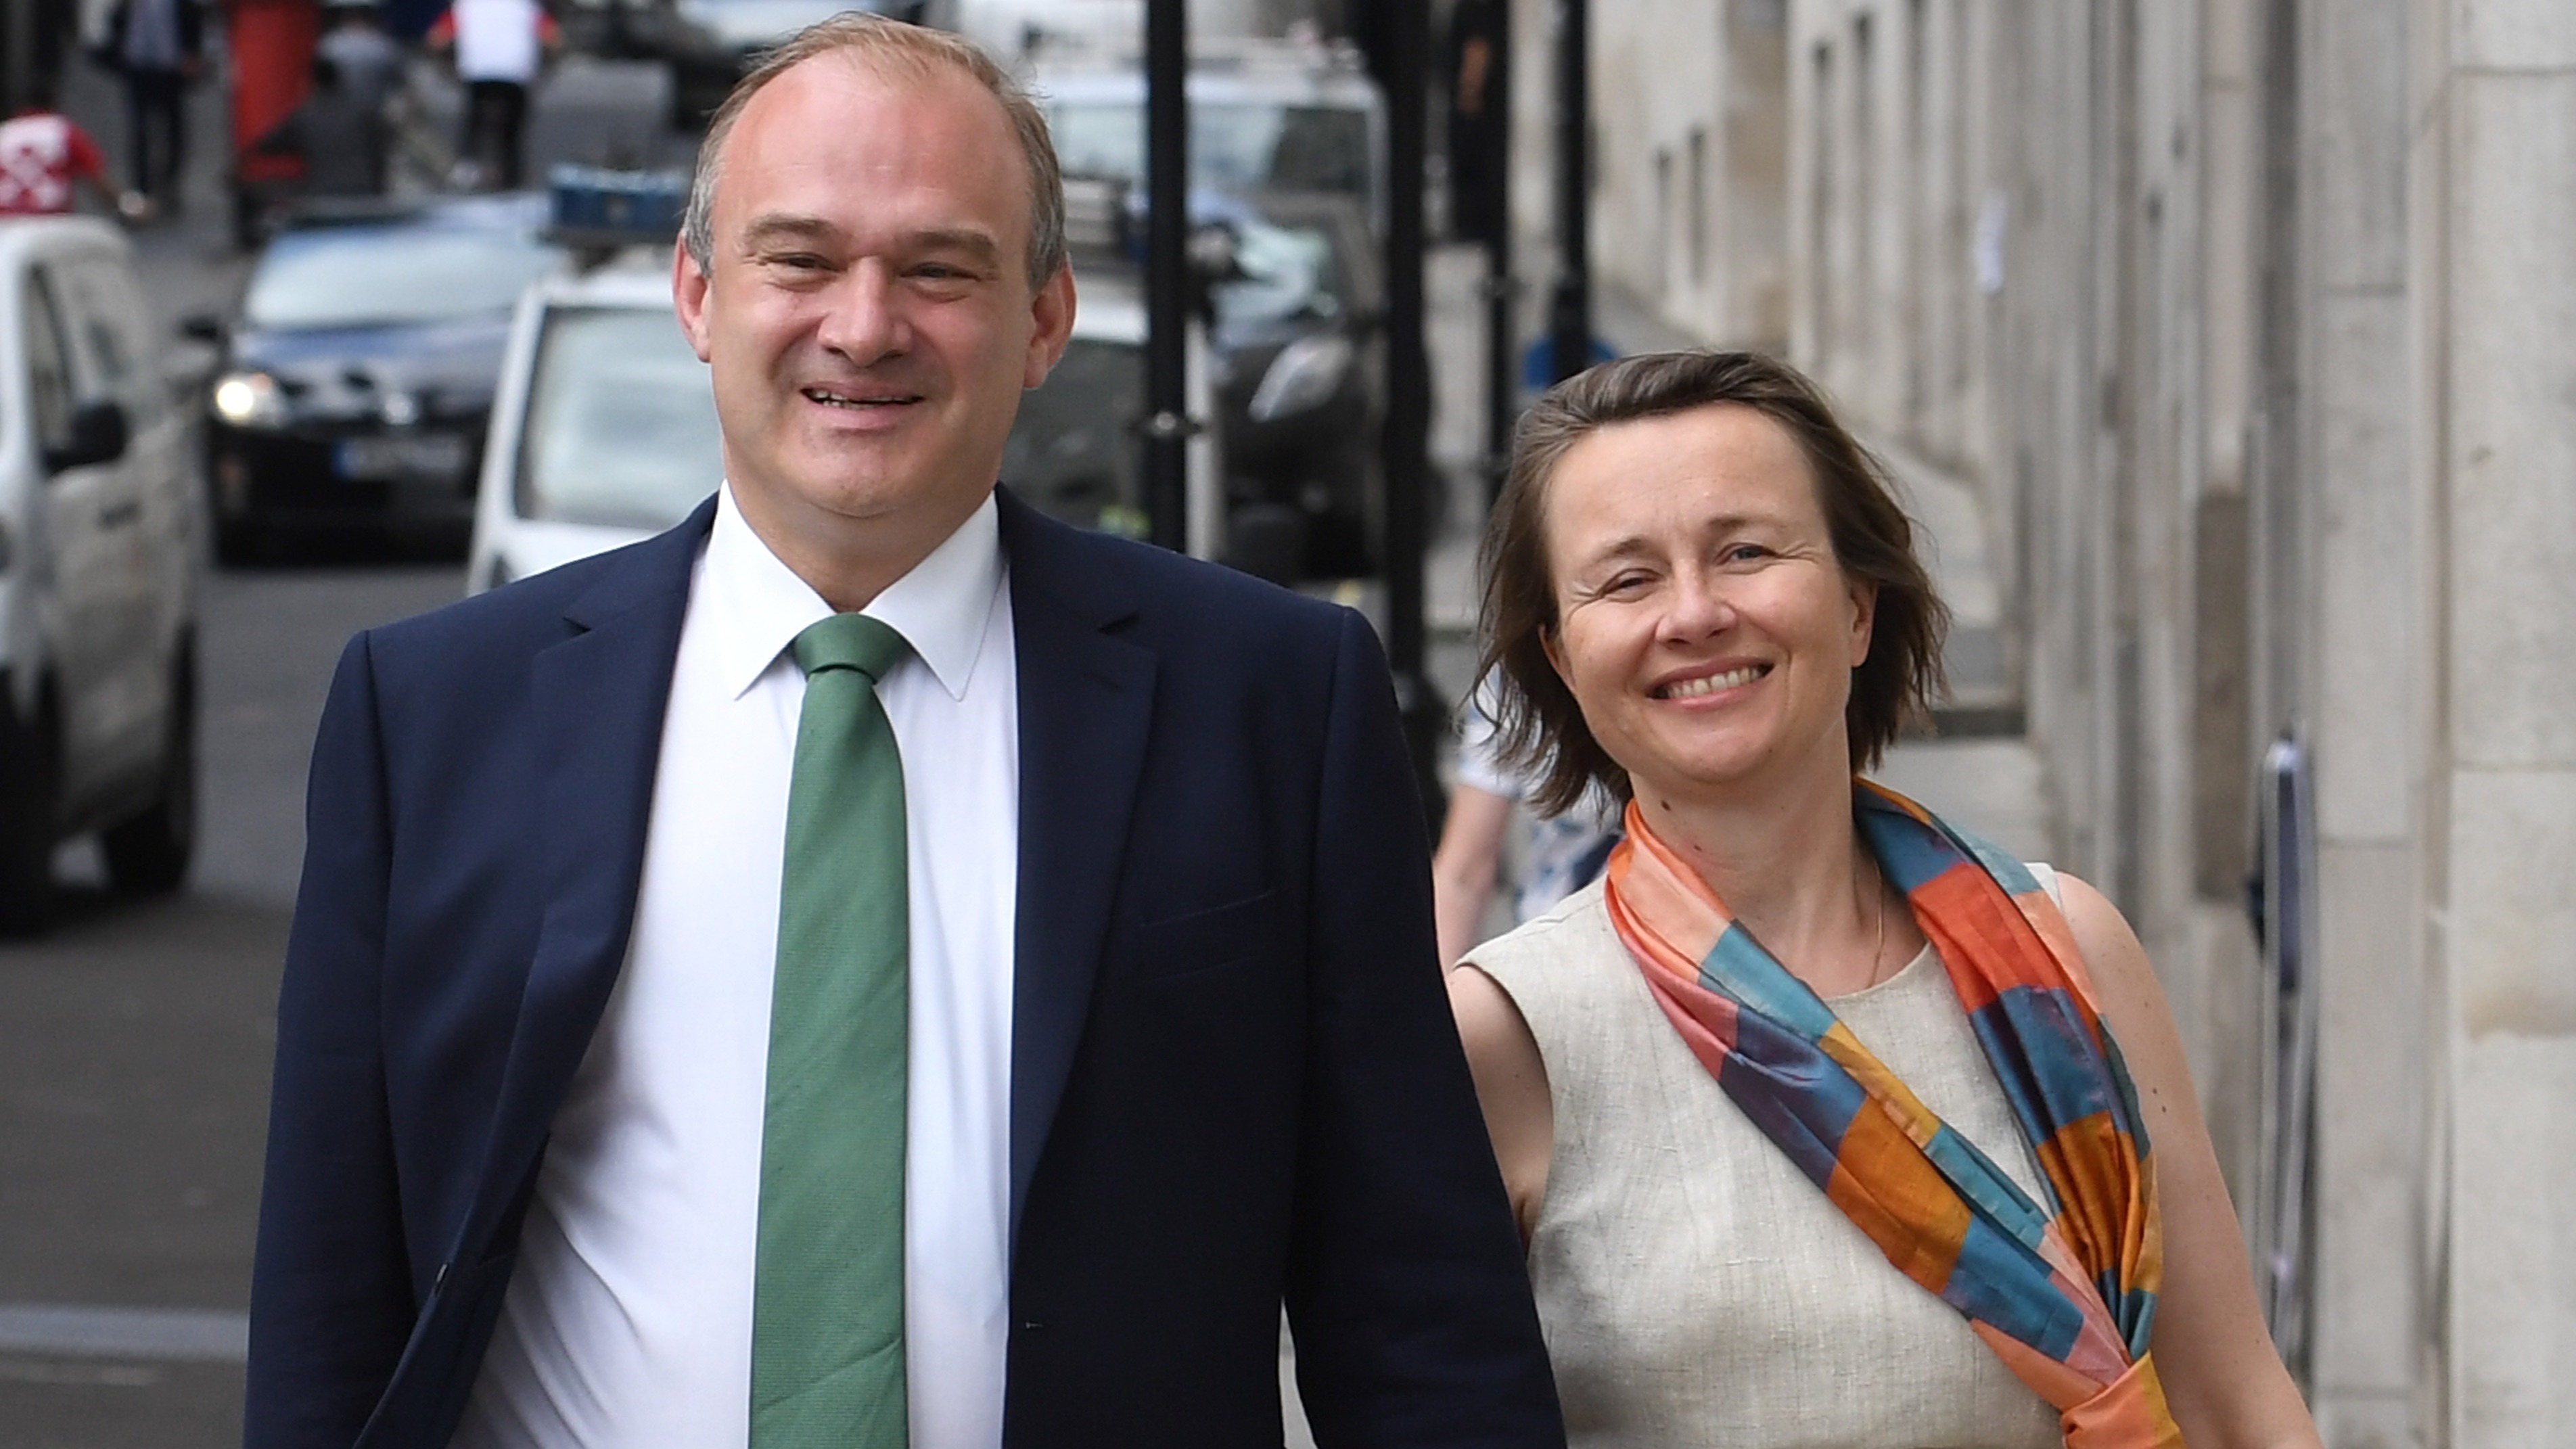 Liberal Democrat Leader Ed Davey Says His Wife Wants To Be A Voice For Carers With Disabilities